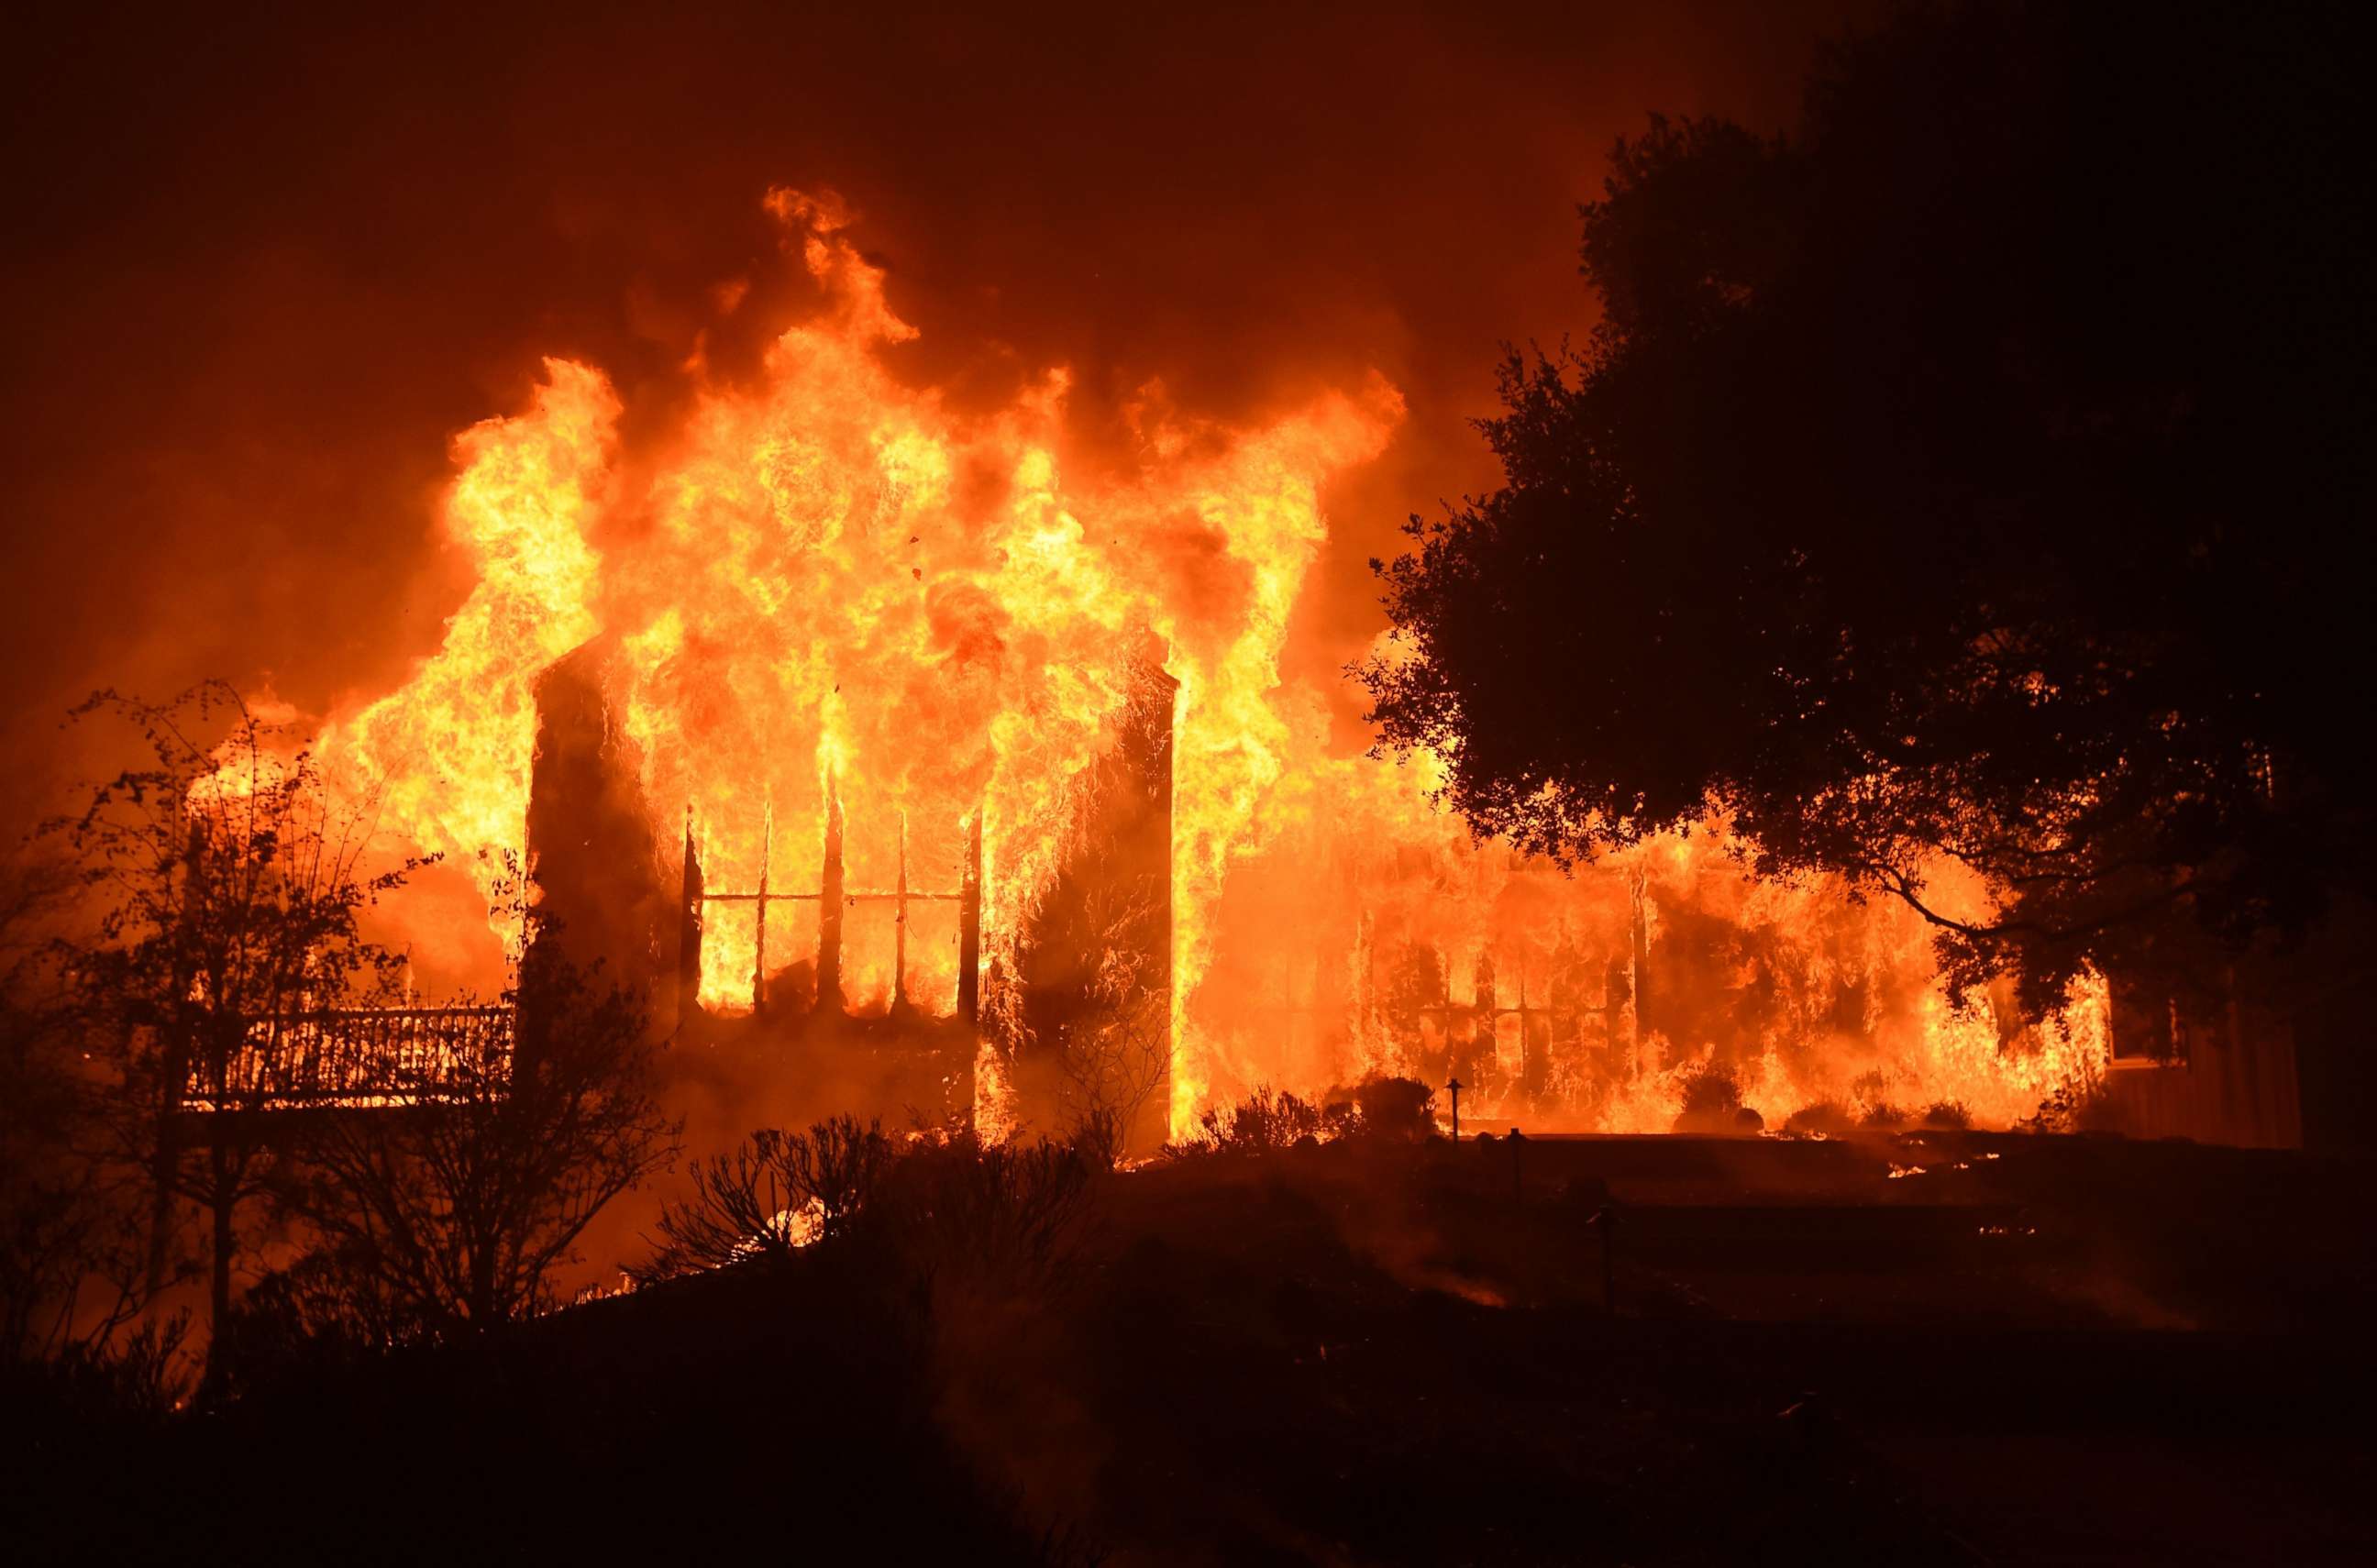 PHOTO: The main building at Paras Vineyards burns in the Mount Veeder area of Napa in California Oct. 10, 2017.